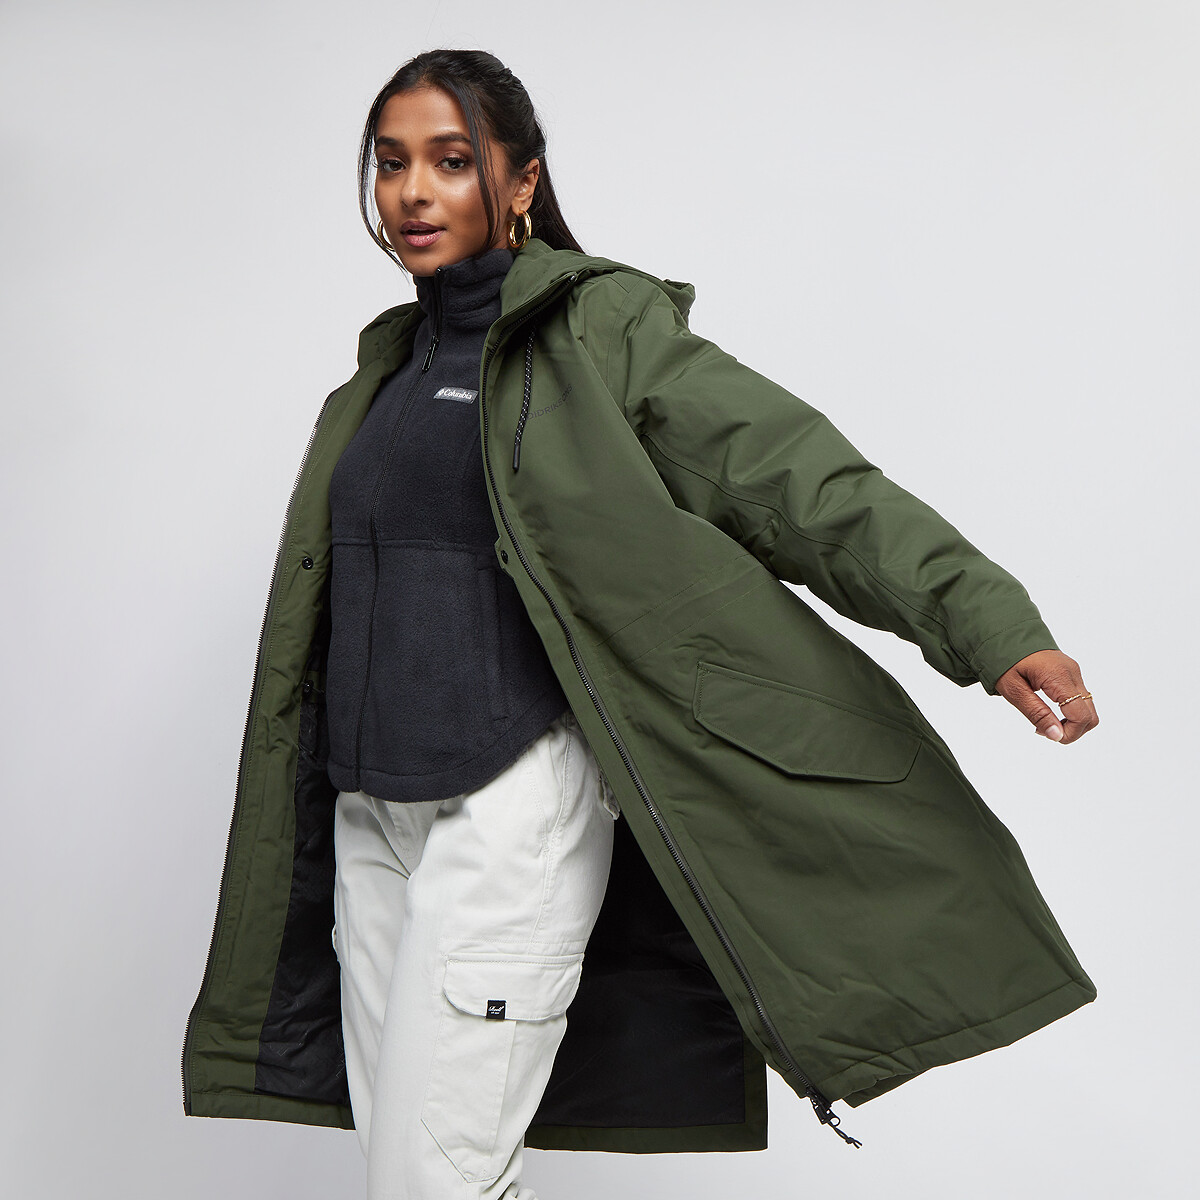 Buy Didriksons Marta-Lisa Parka £100.00 – deep Best from Deals (Today) on green